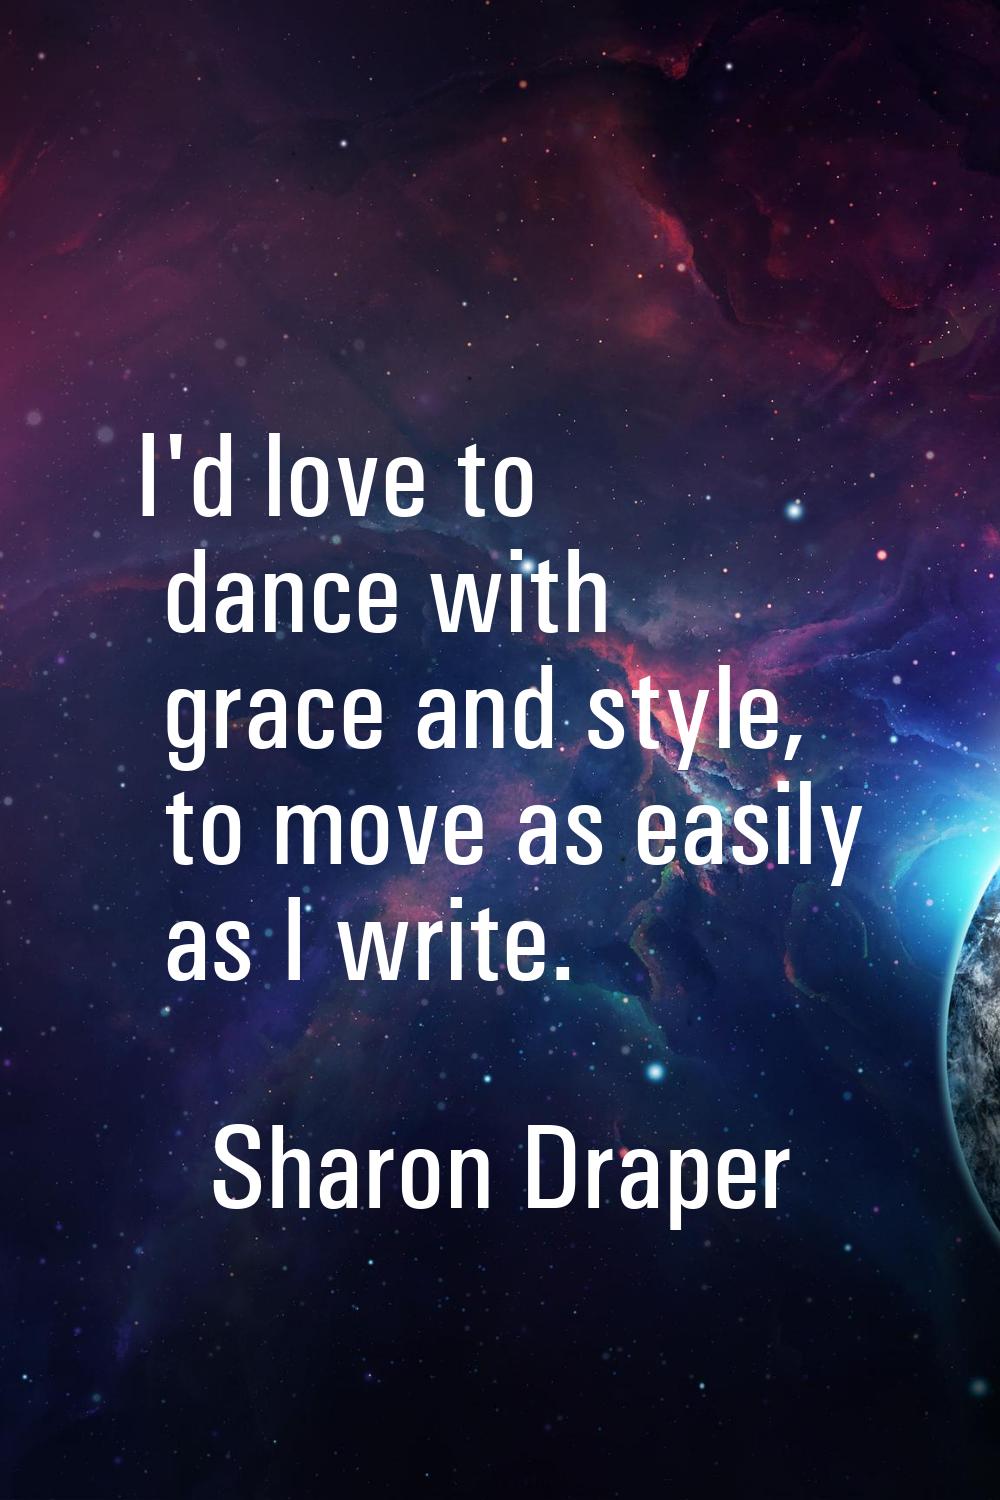 I'd love to dance with grace and style, to move as easily as I write.